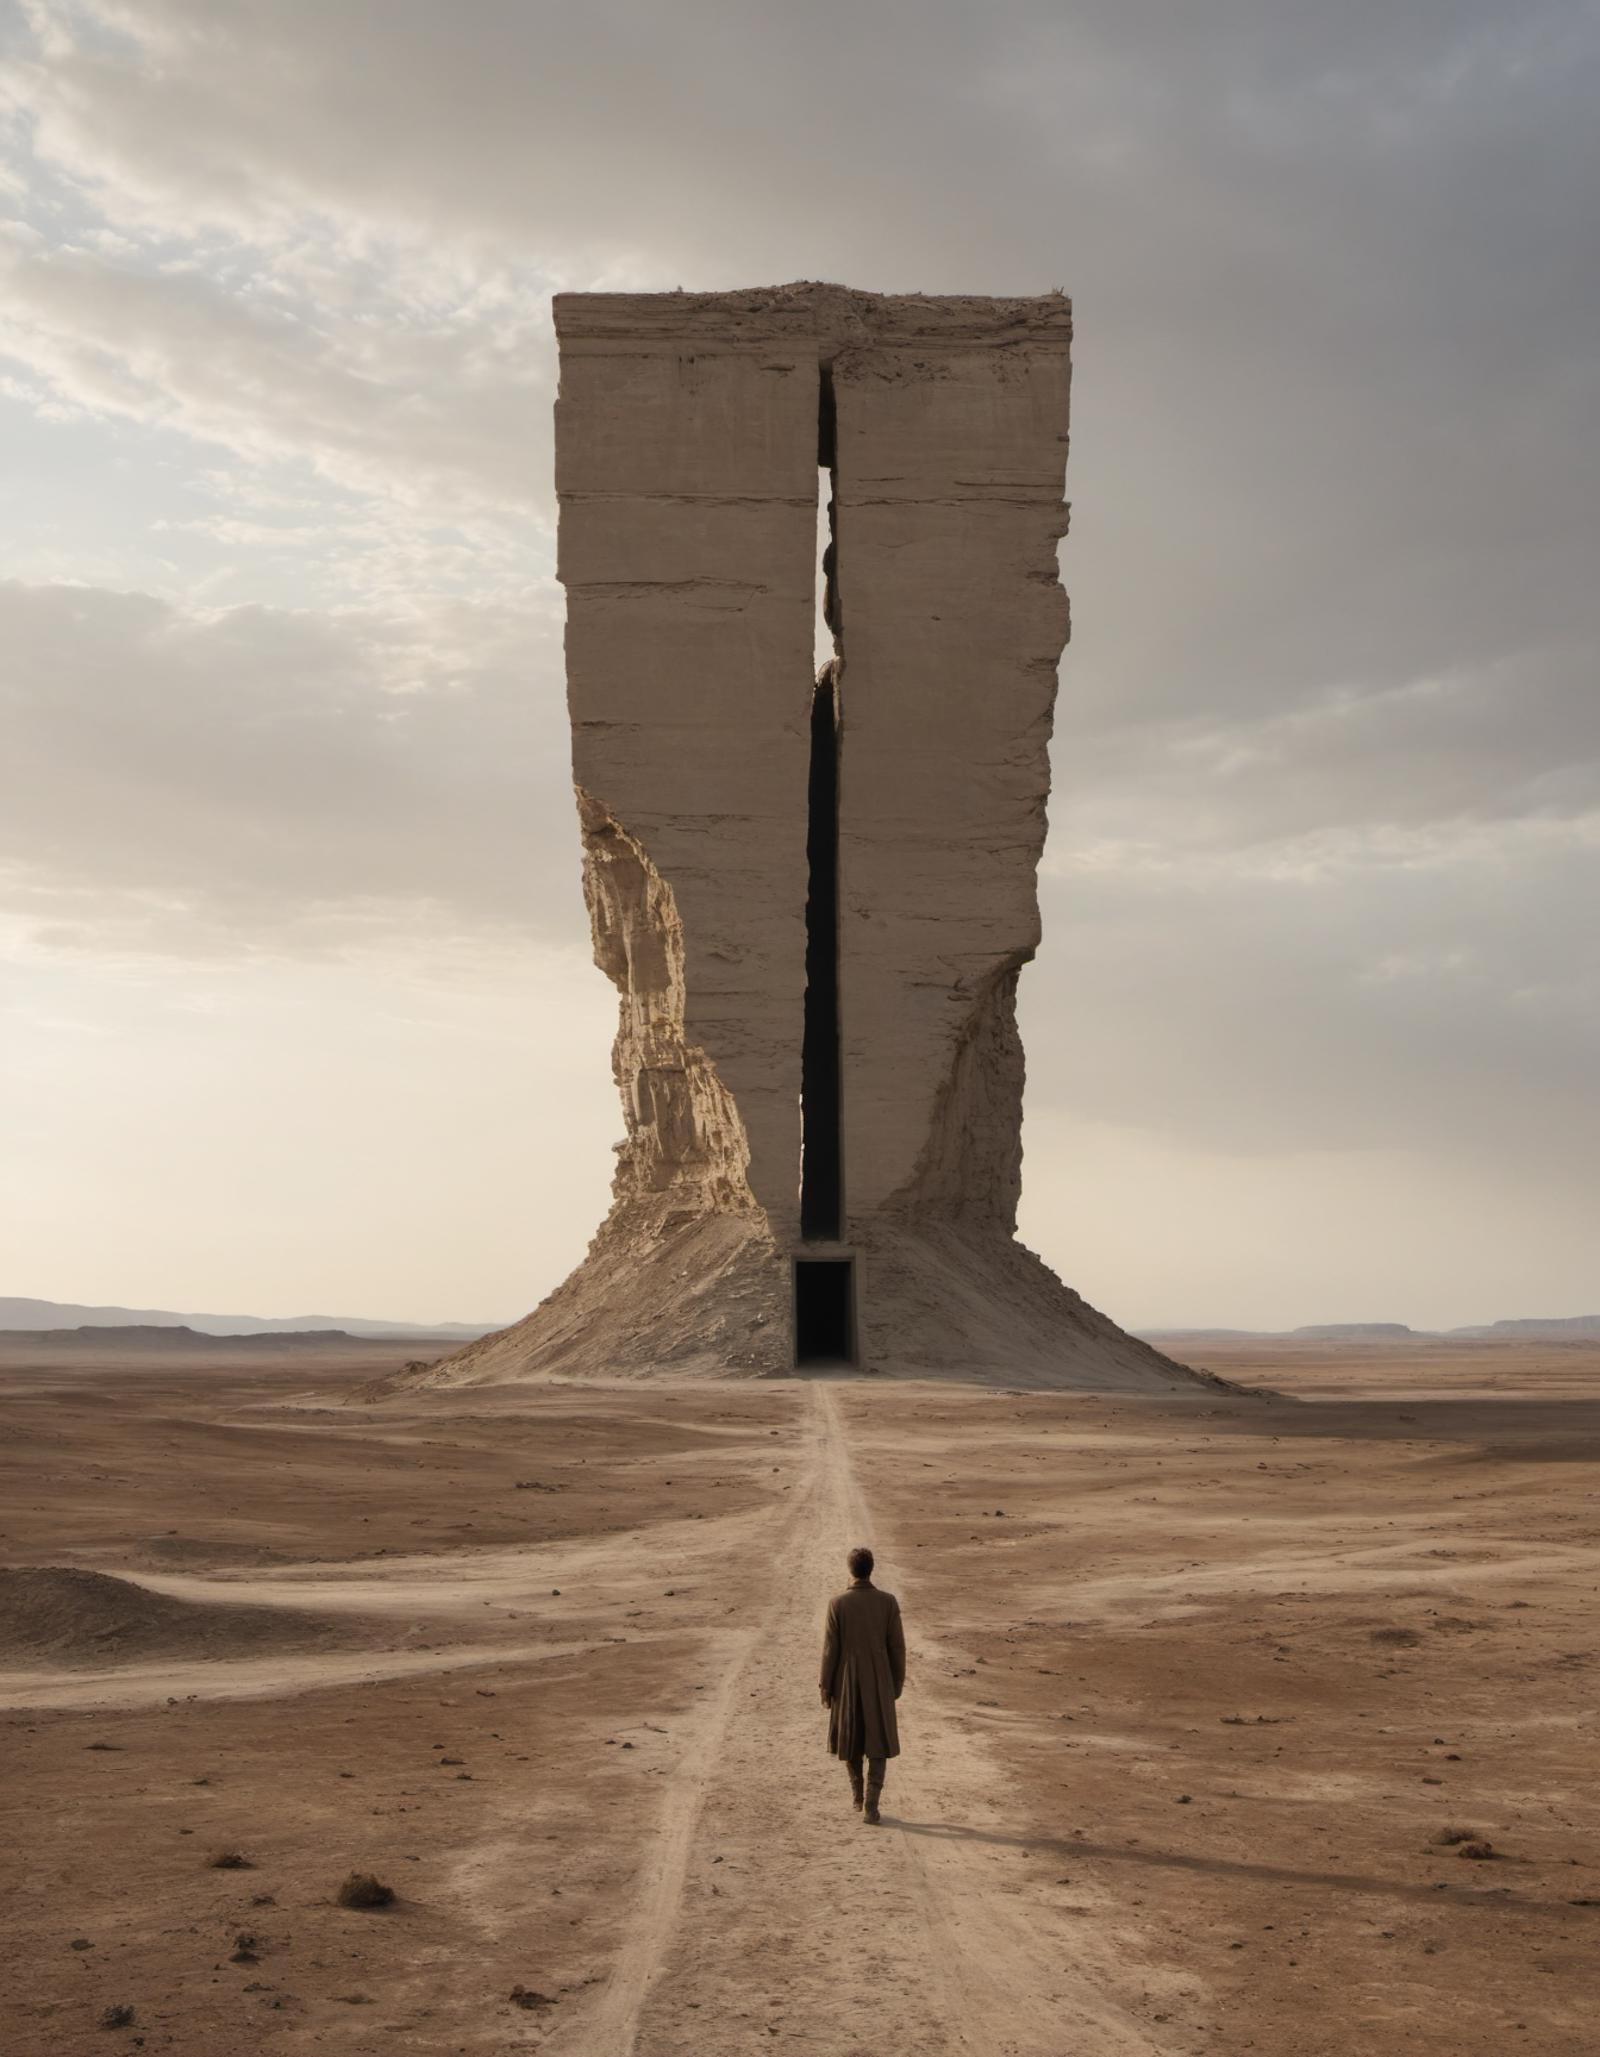 A man walking towards a large stone structure with a doorway in the middle.